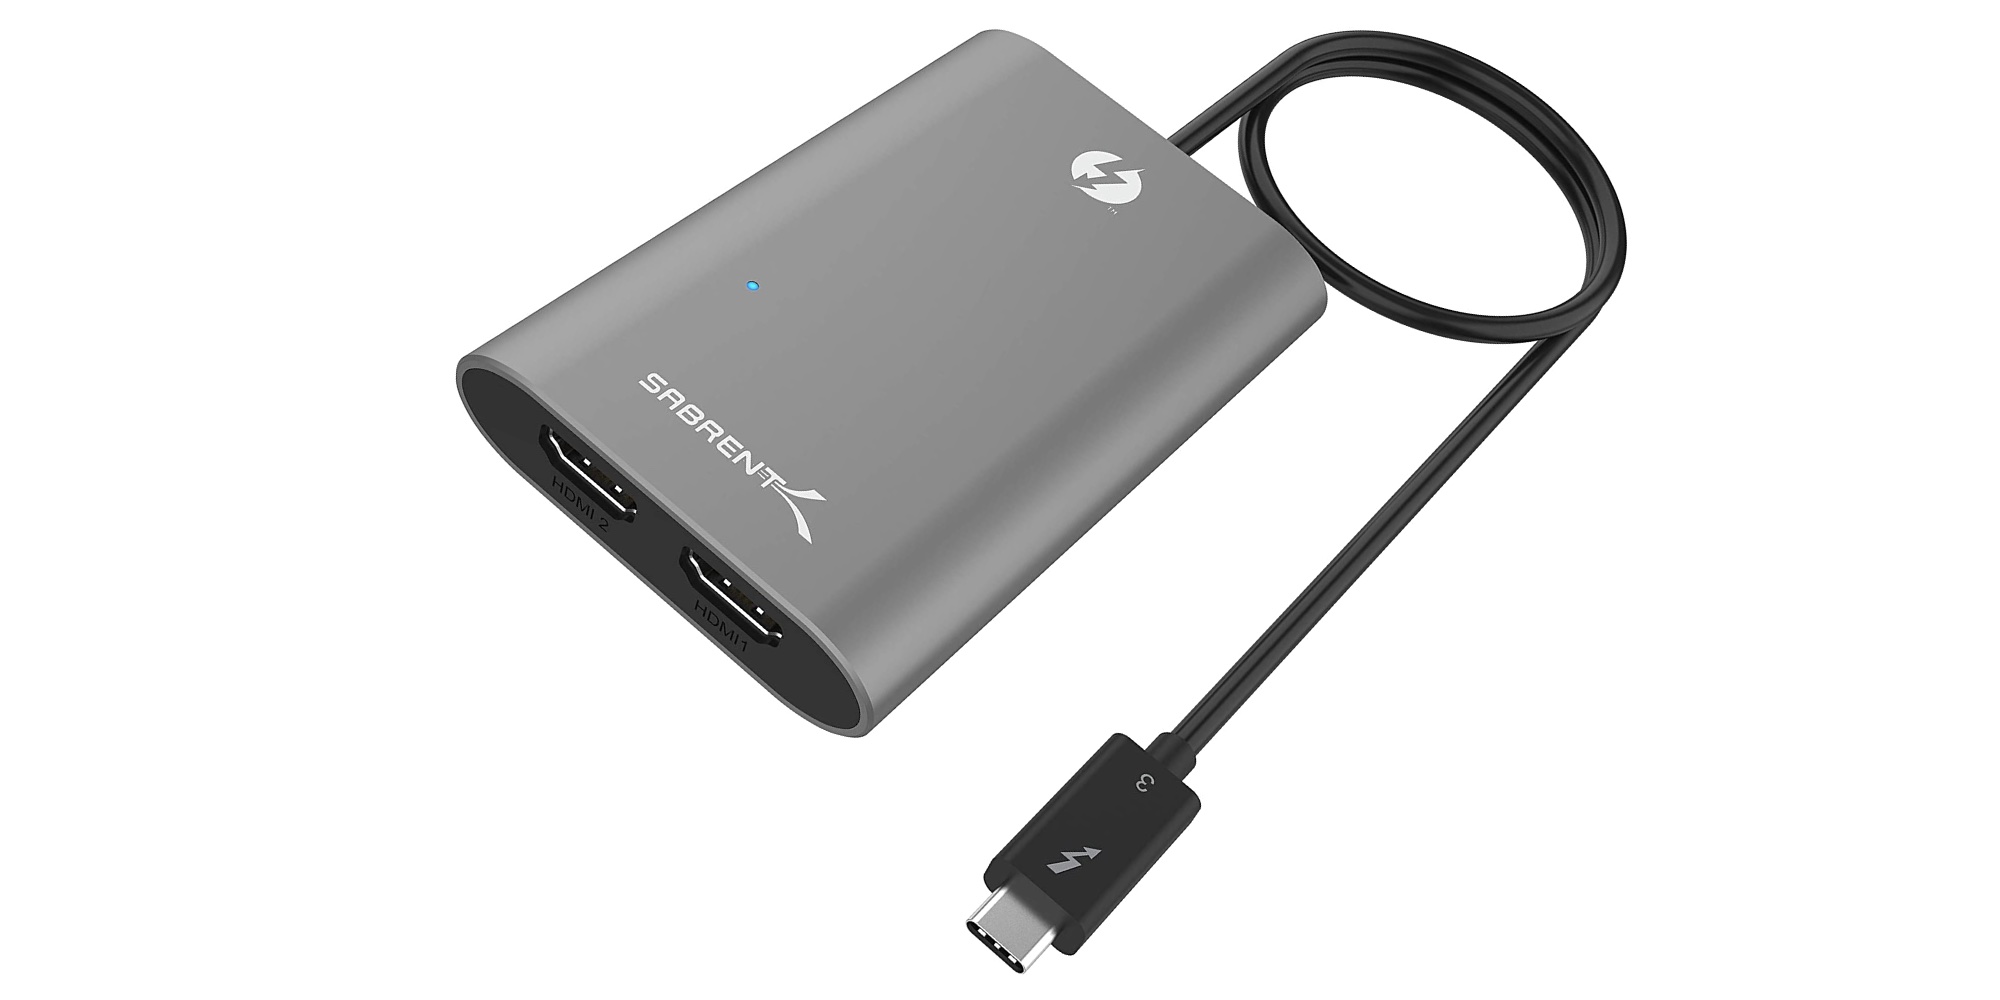 Thunderbolt 3 Docking Station with Power Delivery up to 60W Charging - -  Sabrent